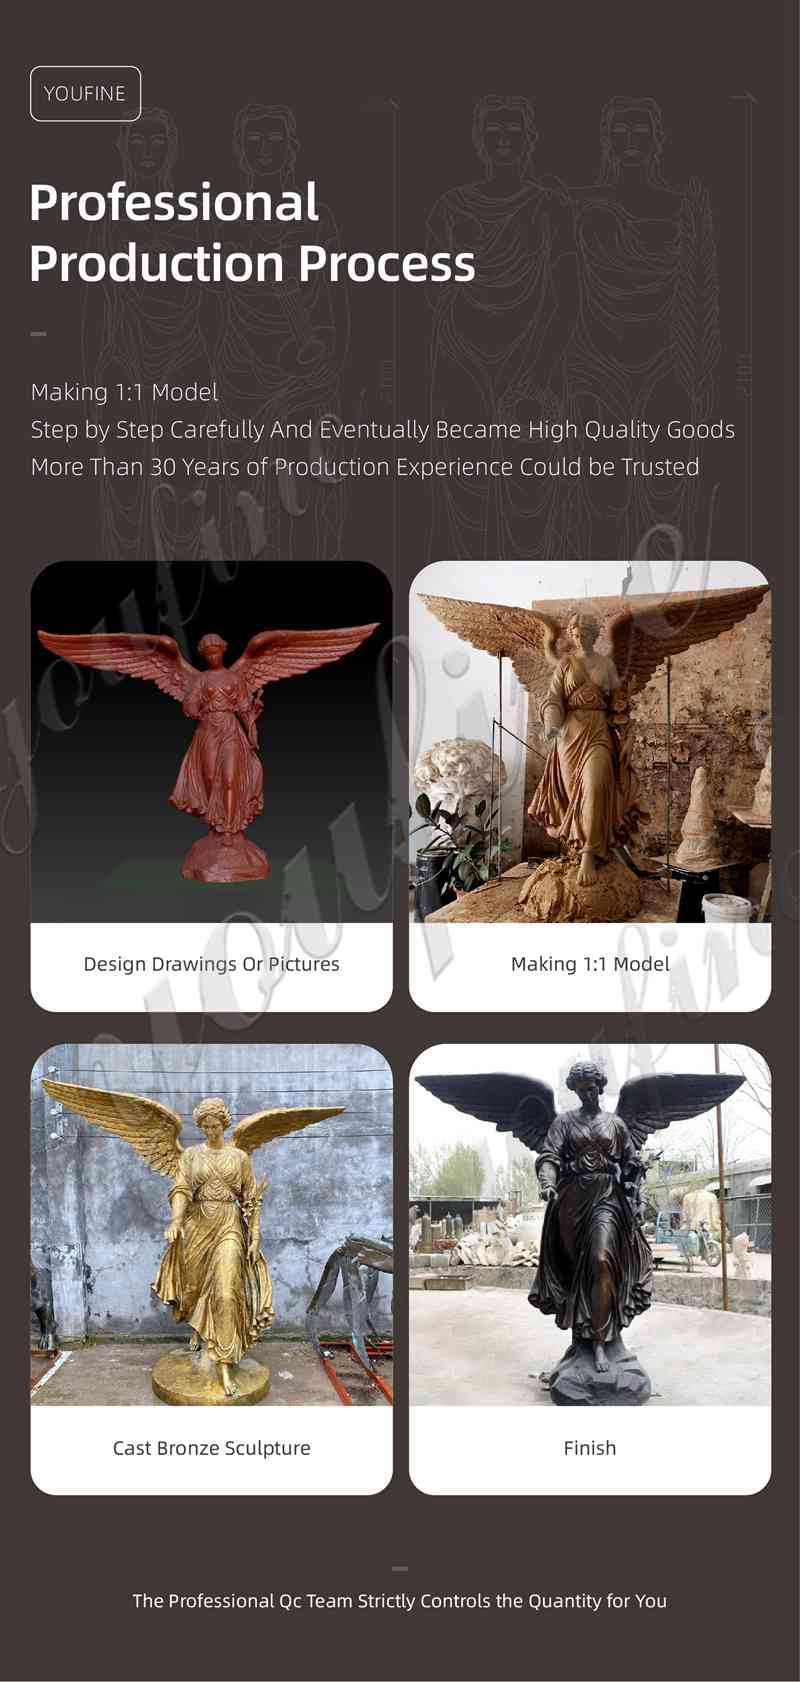 Why Choose Your YouFine Bronze Foundry?